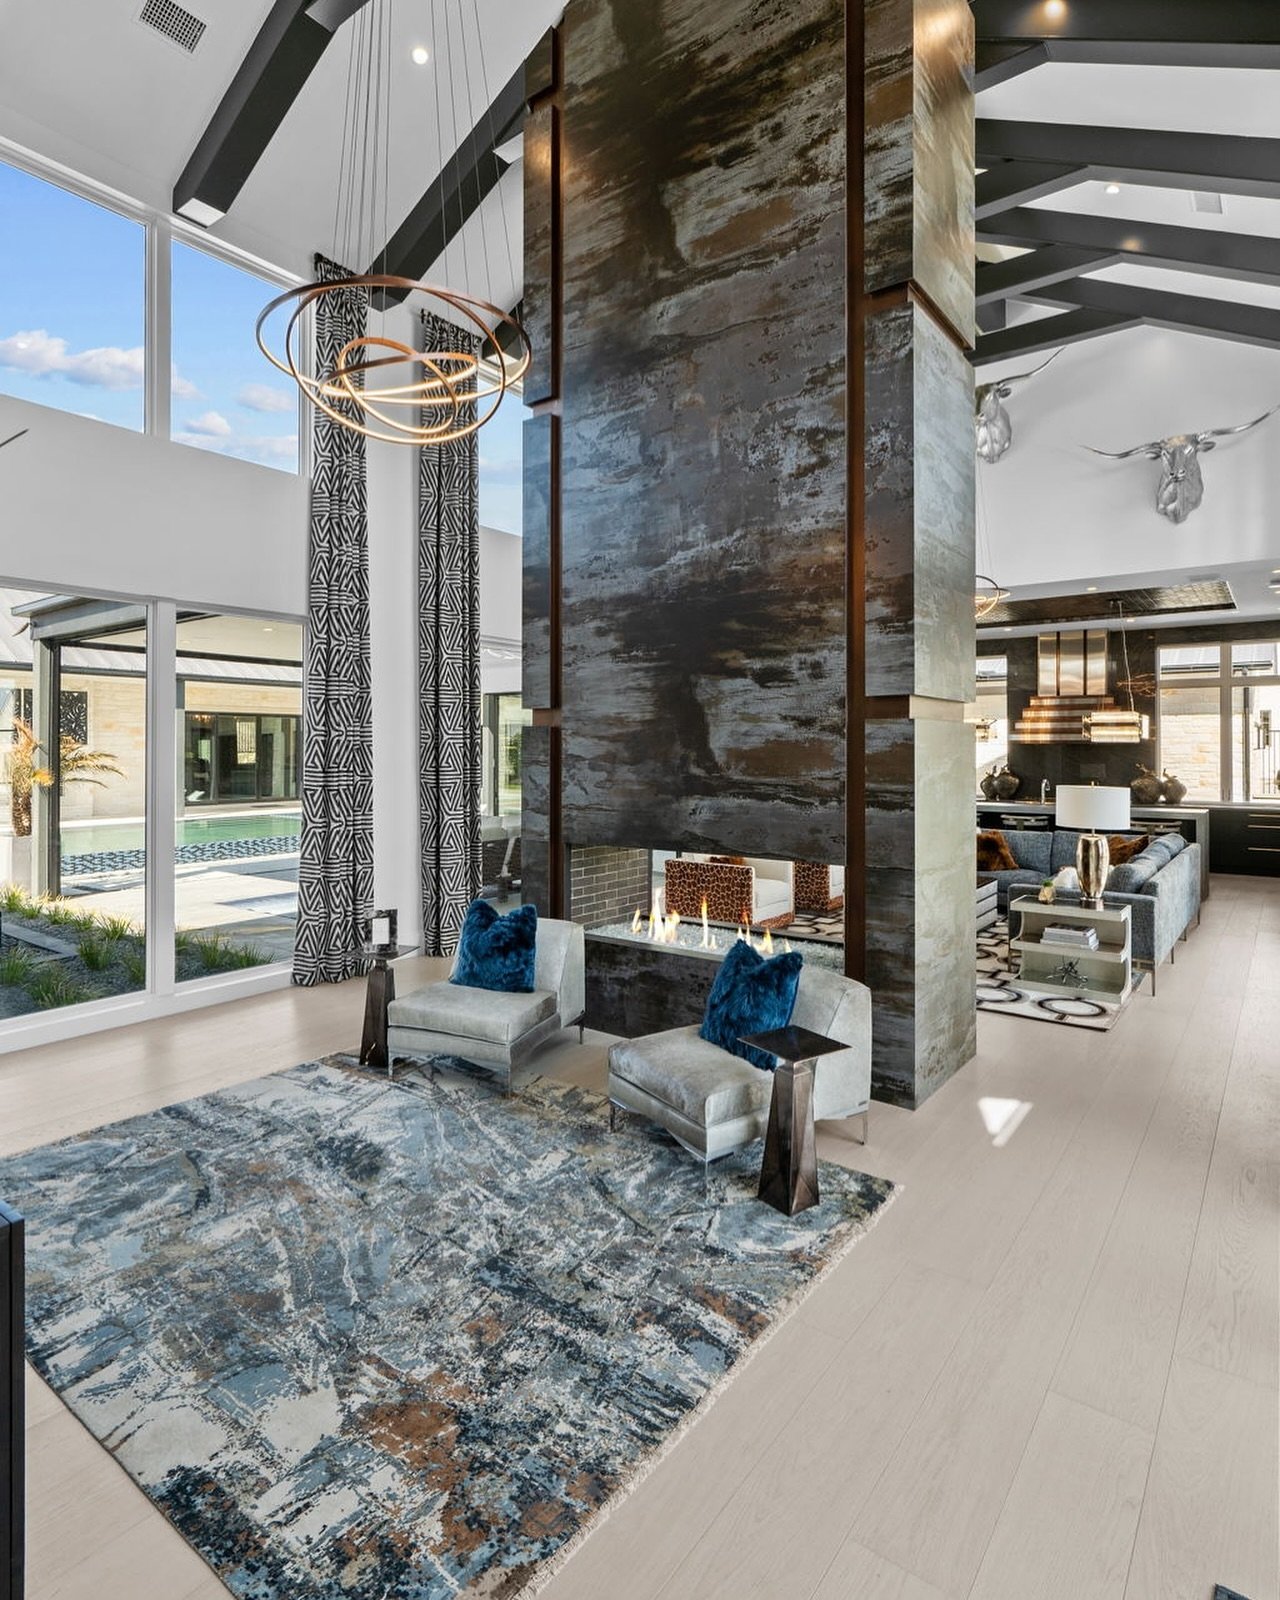 &ldquo;Susan Semmelmann leads a team of 30 professionals at Semmelmann Interiors, creating forward-thinking spaces that have never been done before. Susan and her team designed this stunning Fort Worth home bringing to life a vision of refined elegan